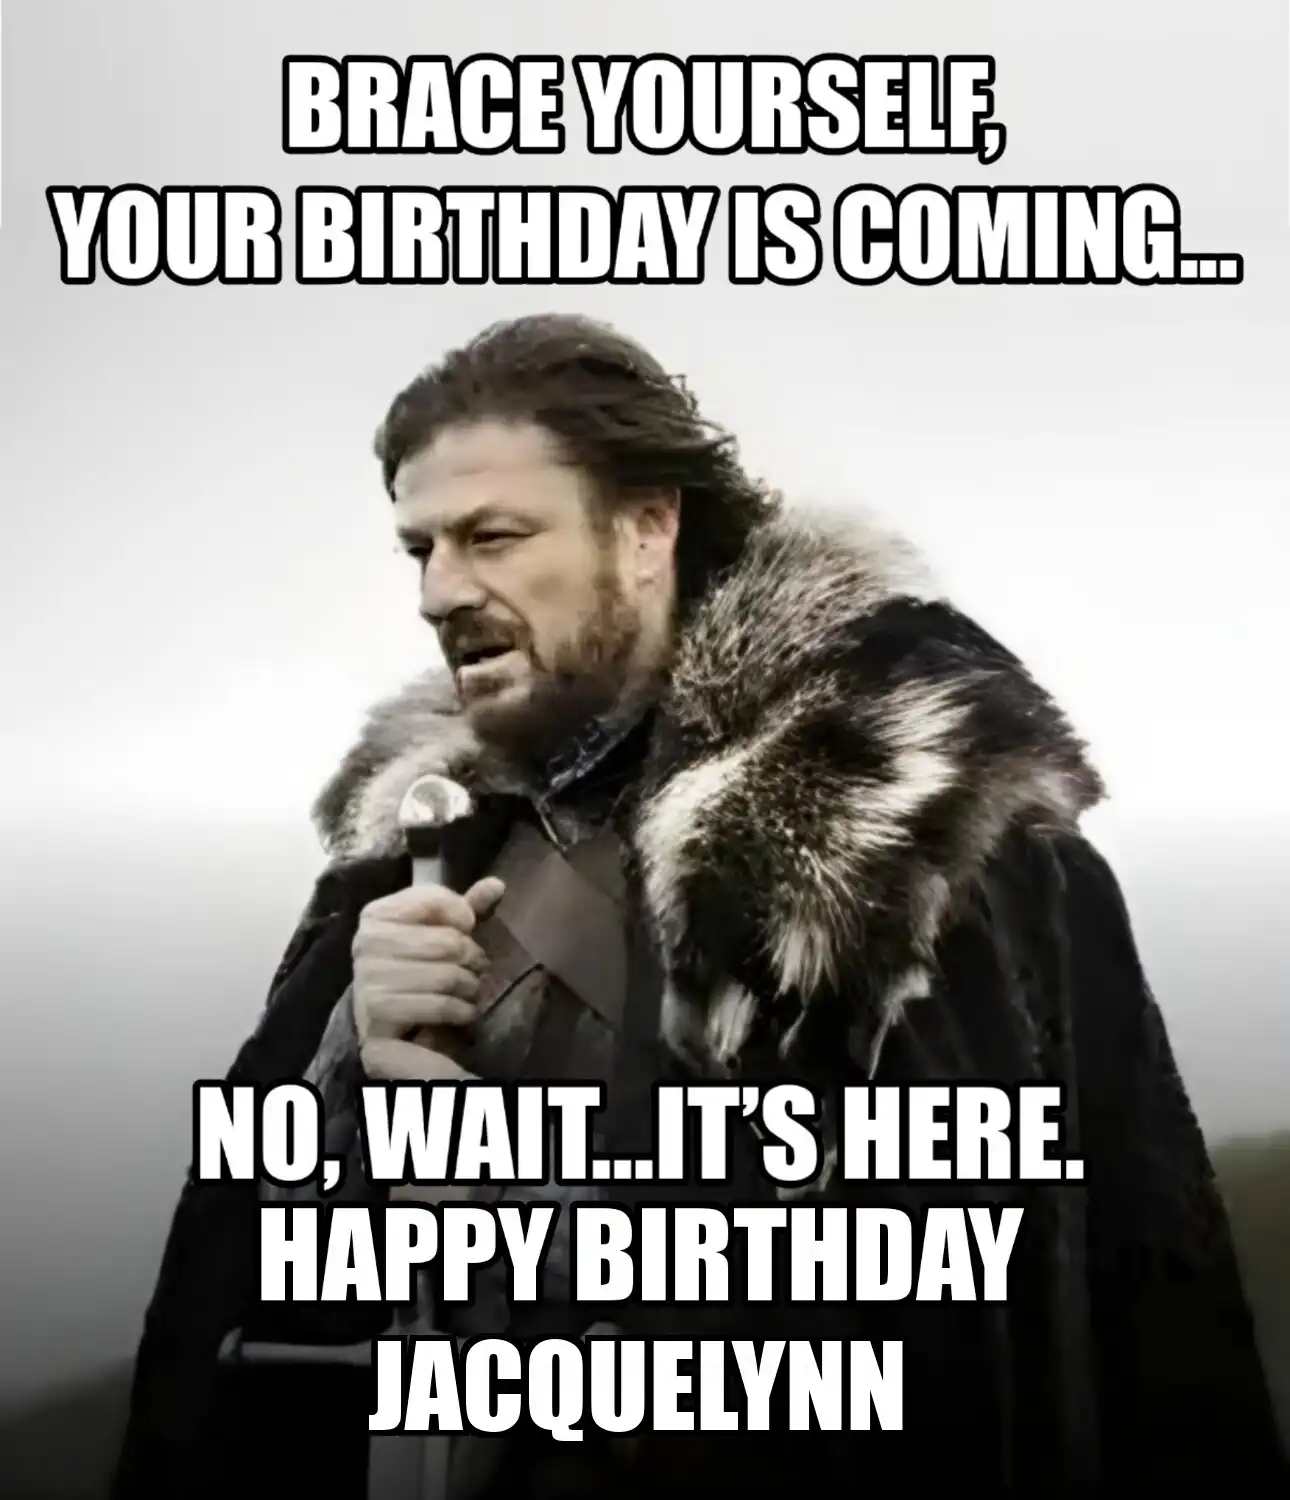 Happy Birthday Jacquelynn Brace Yourself Your Birthday Is Coming Meme